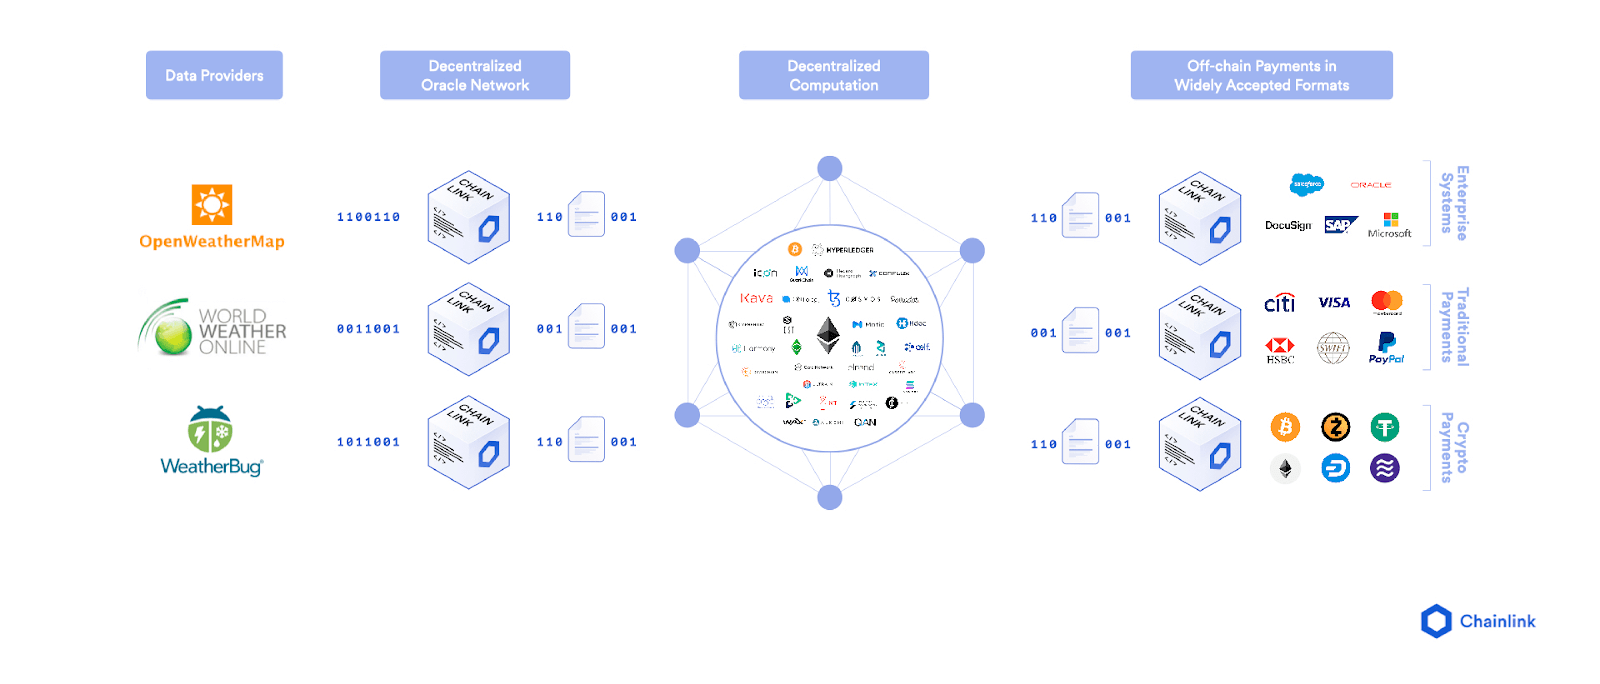 Decentralized Oracle Networks